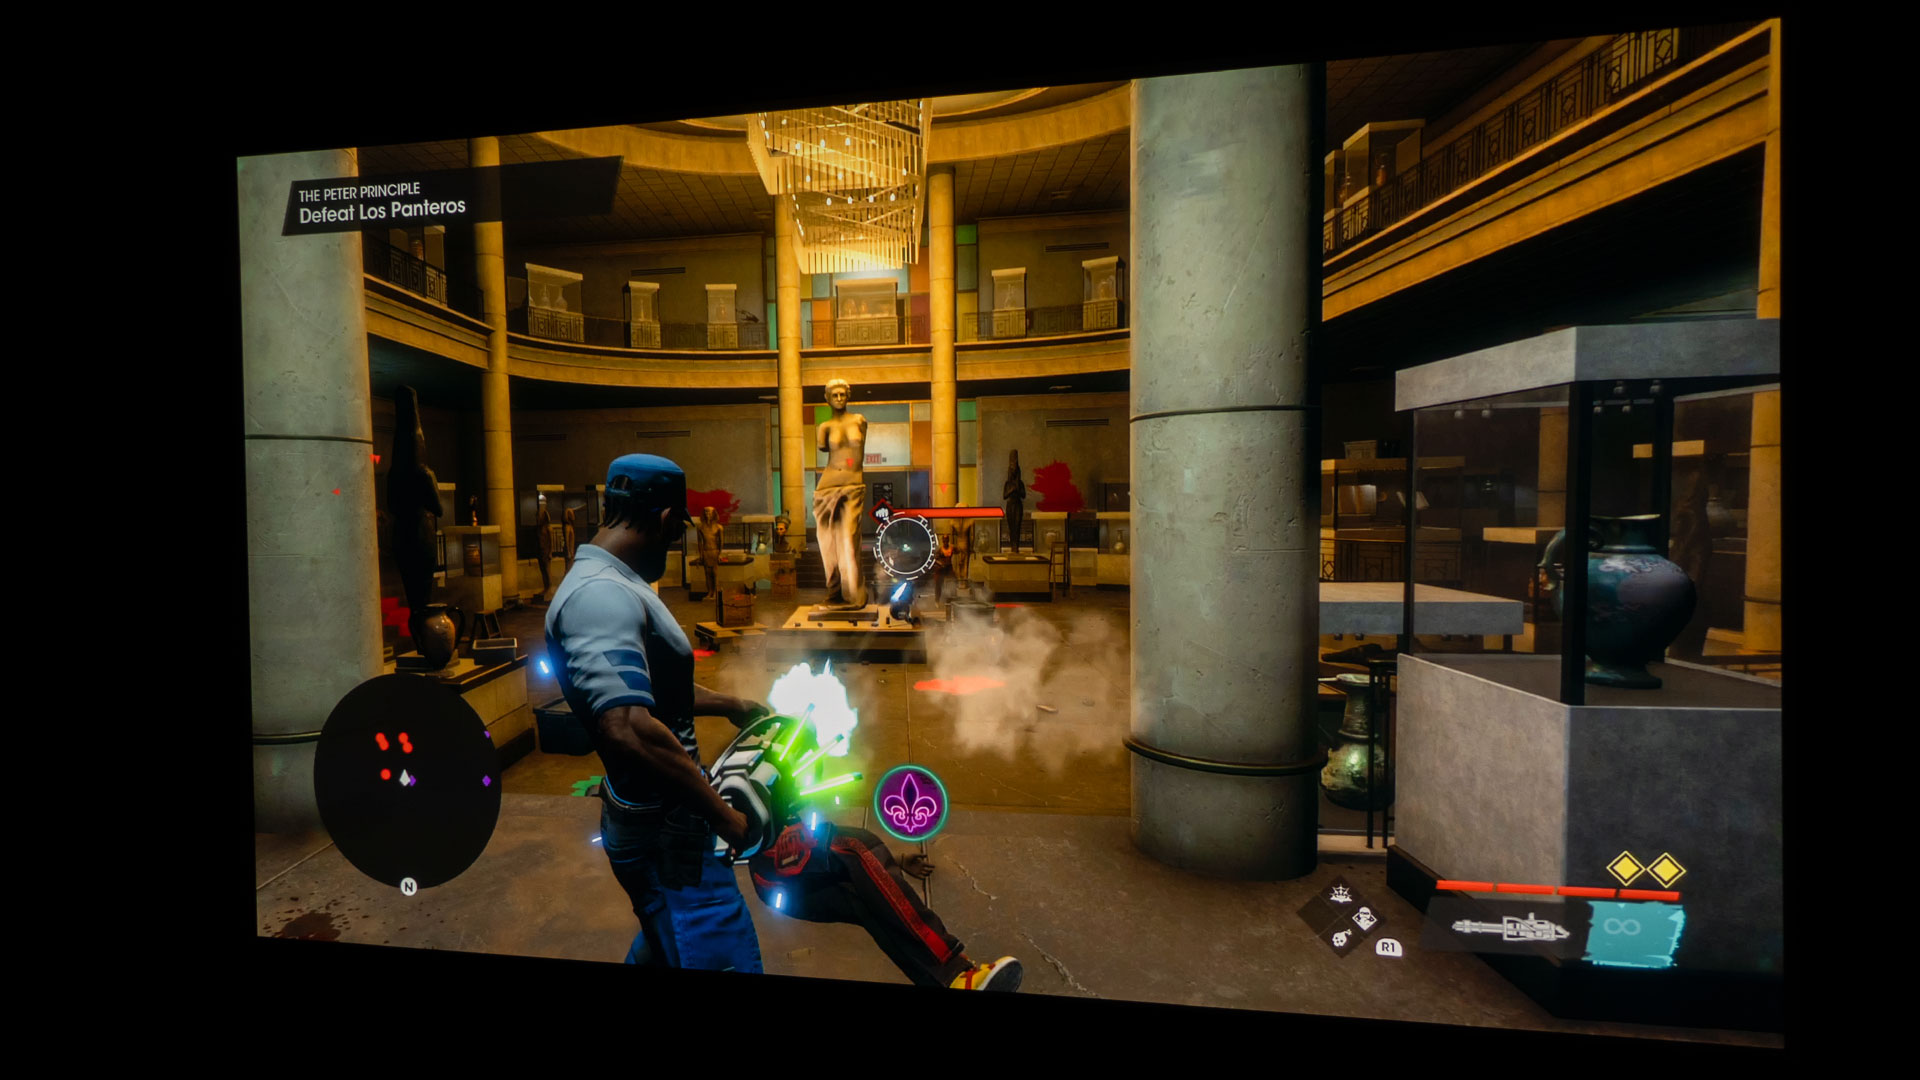 Saints Row Becomes Self Made with AccelByte